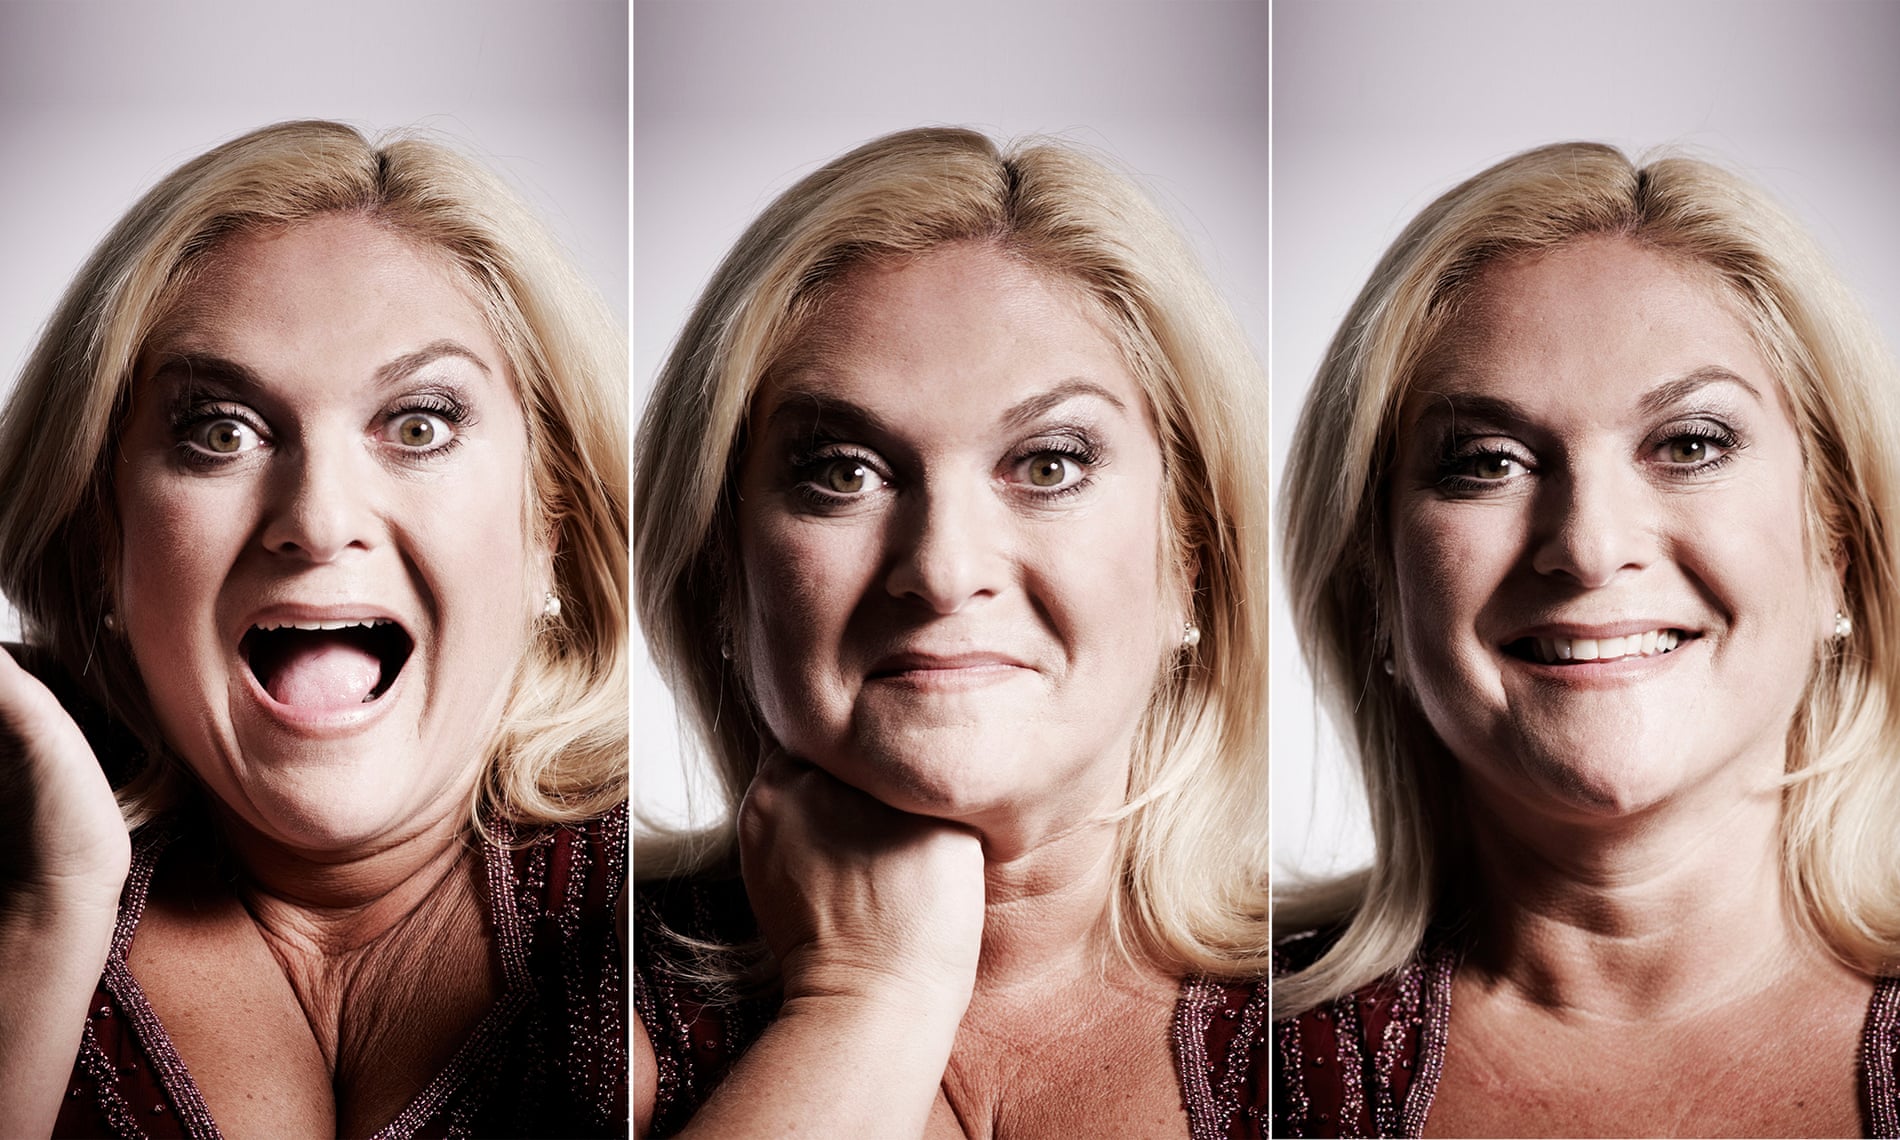 ‘I’m full of everything. Angst and ecstasy and fun’ … Vanessa Feltz.